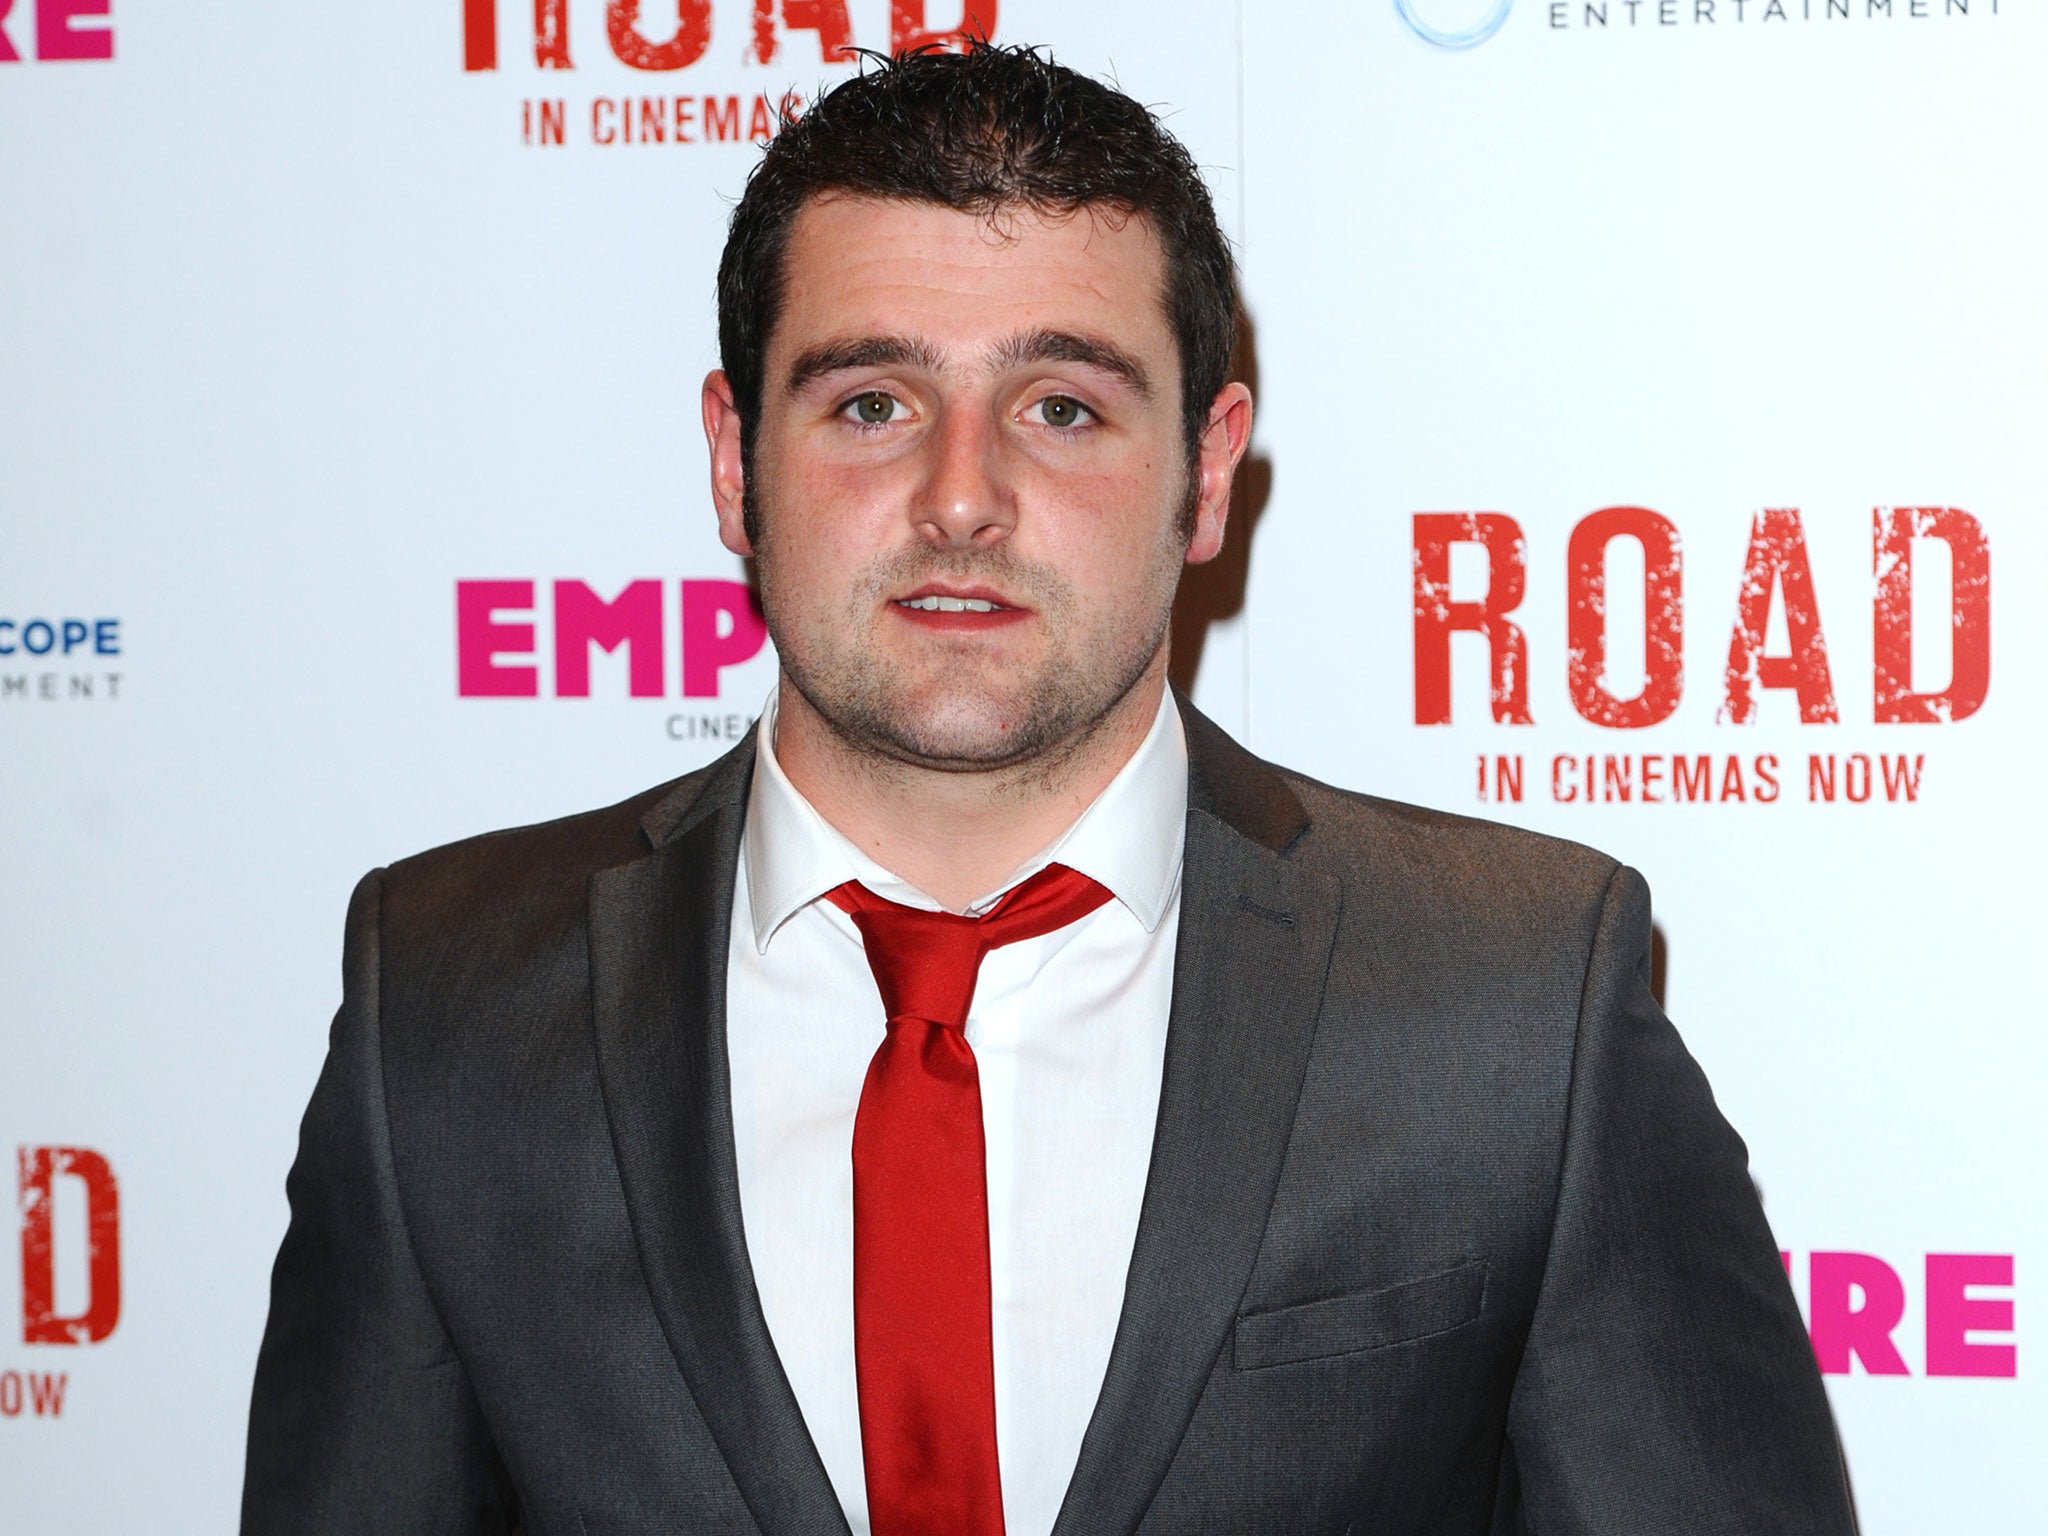 11-time Isle of Man TT winner Michael Dunlop will ride for Yamaha in 2015